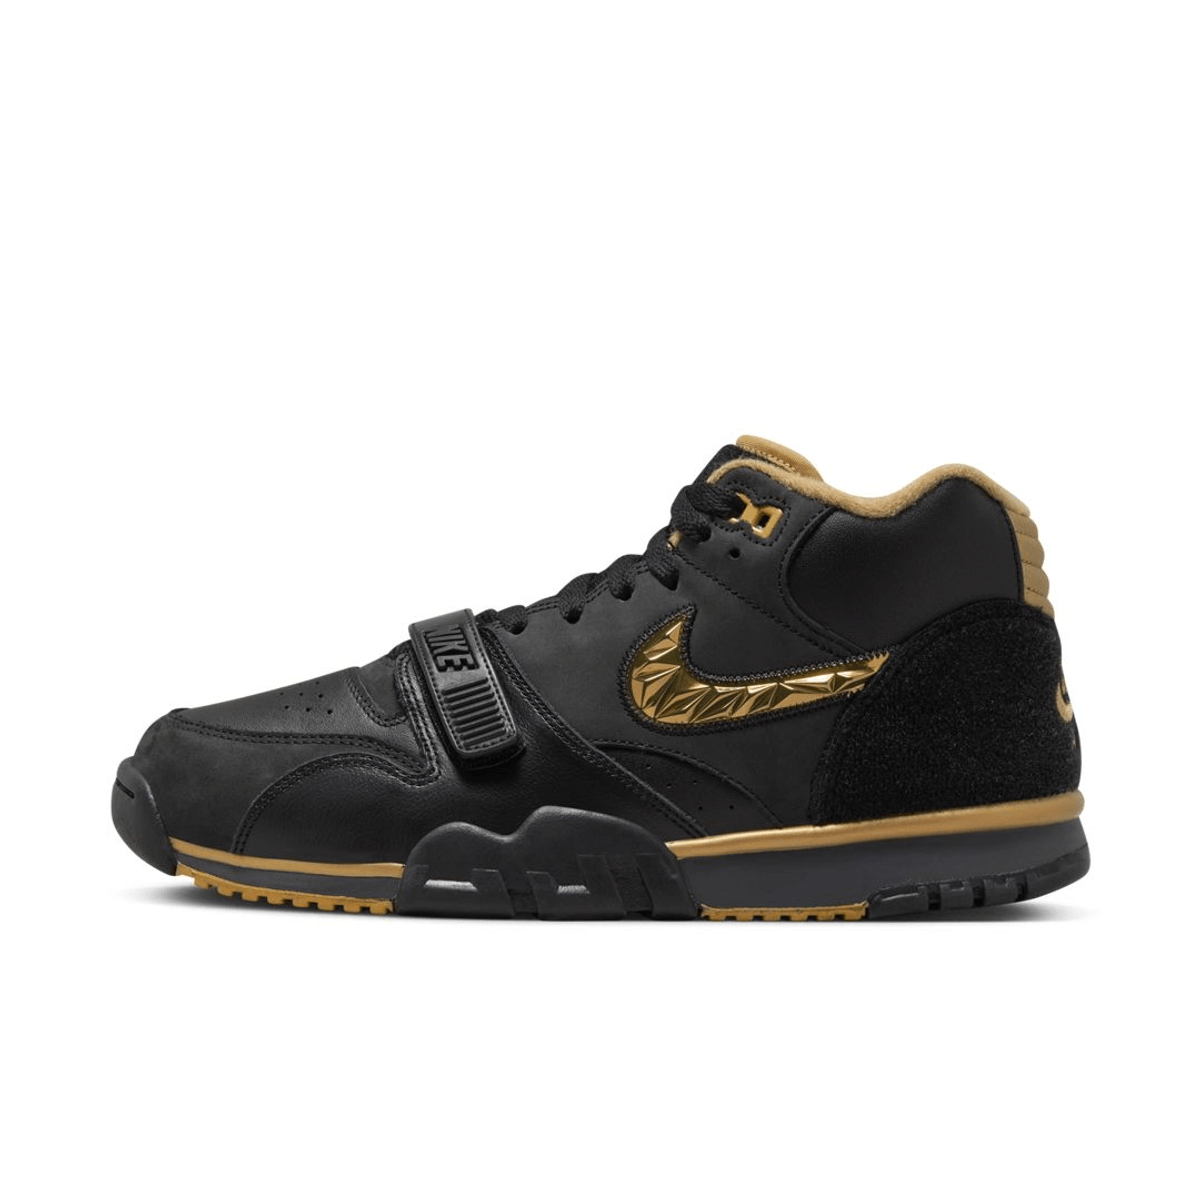 Official Look At The Nike Air Trainer 1 "College Football Playoffs" Black Gold